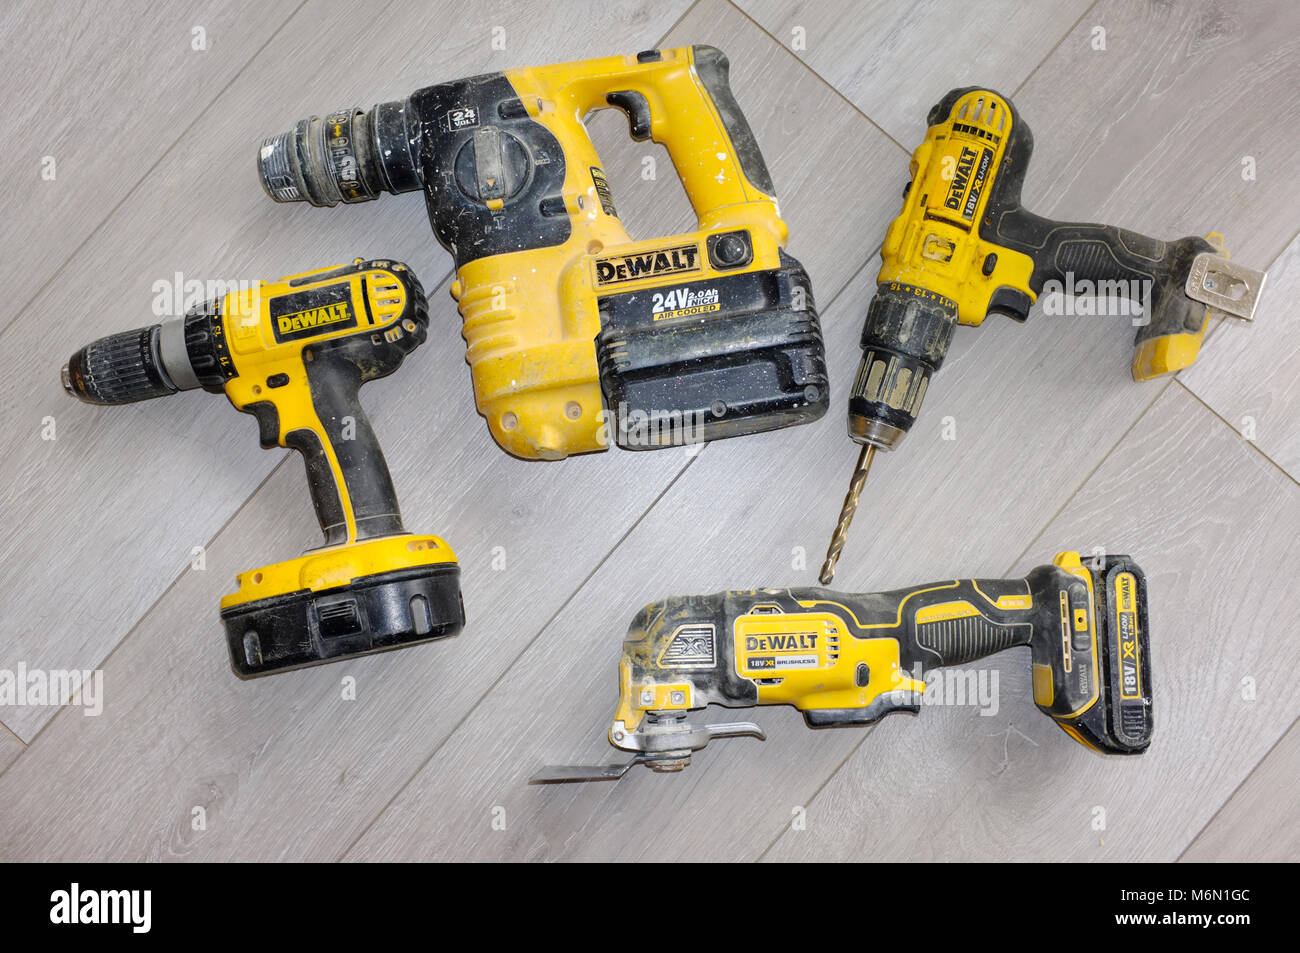 DeWalt yellow power tools as used by builders and trades people. Stock Photo